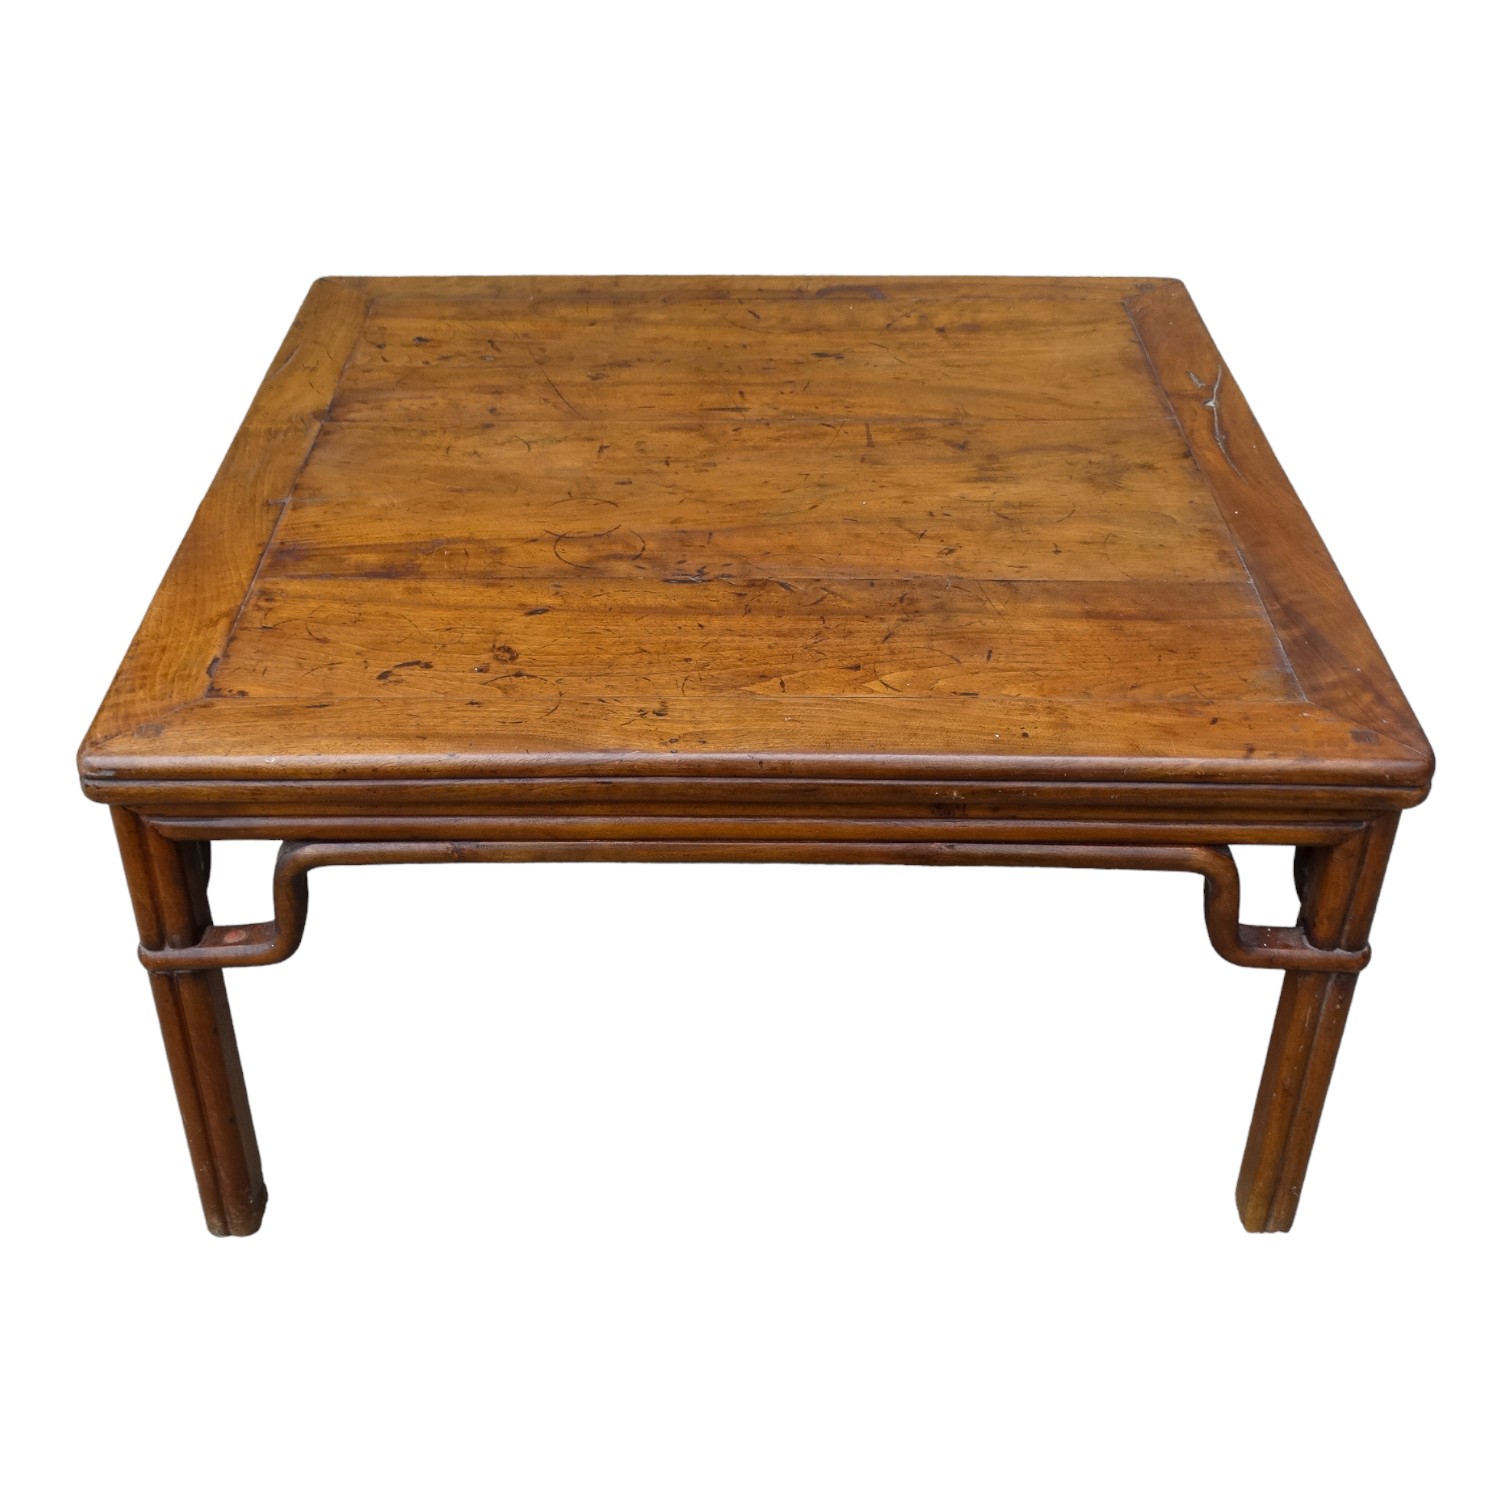 A late 19th century Chinese oriental hardwood low table - the square panelled top above cluster